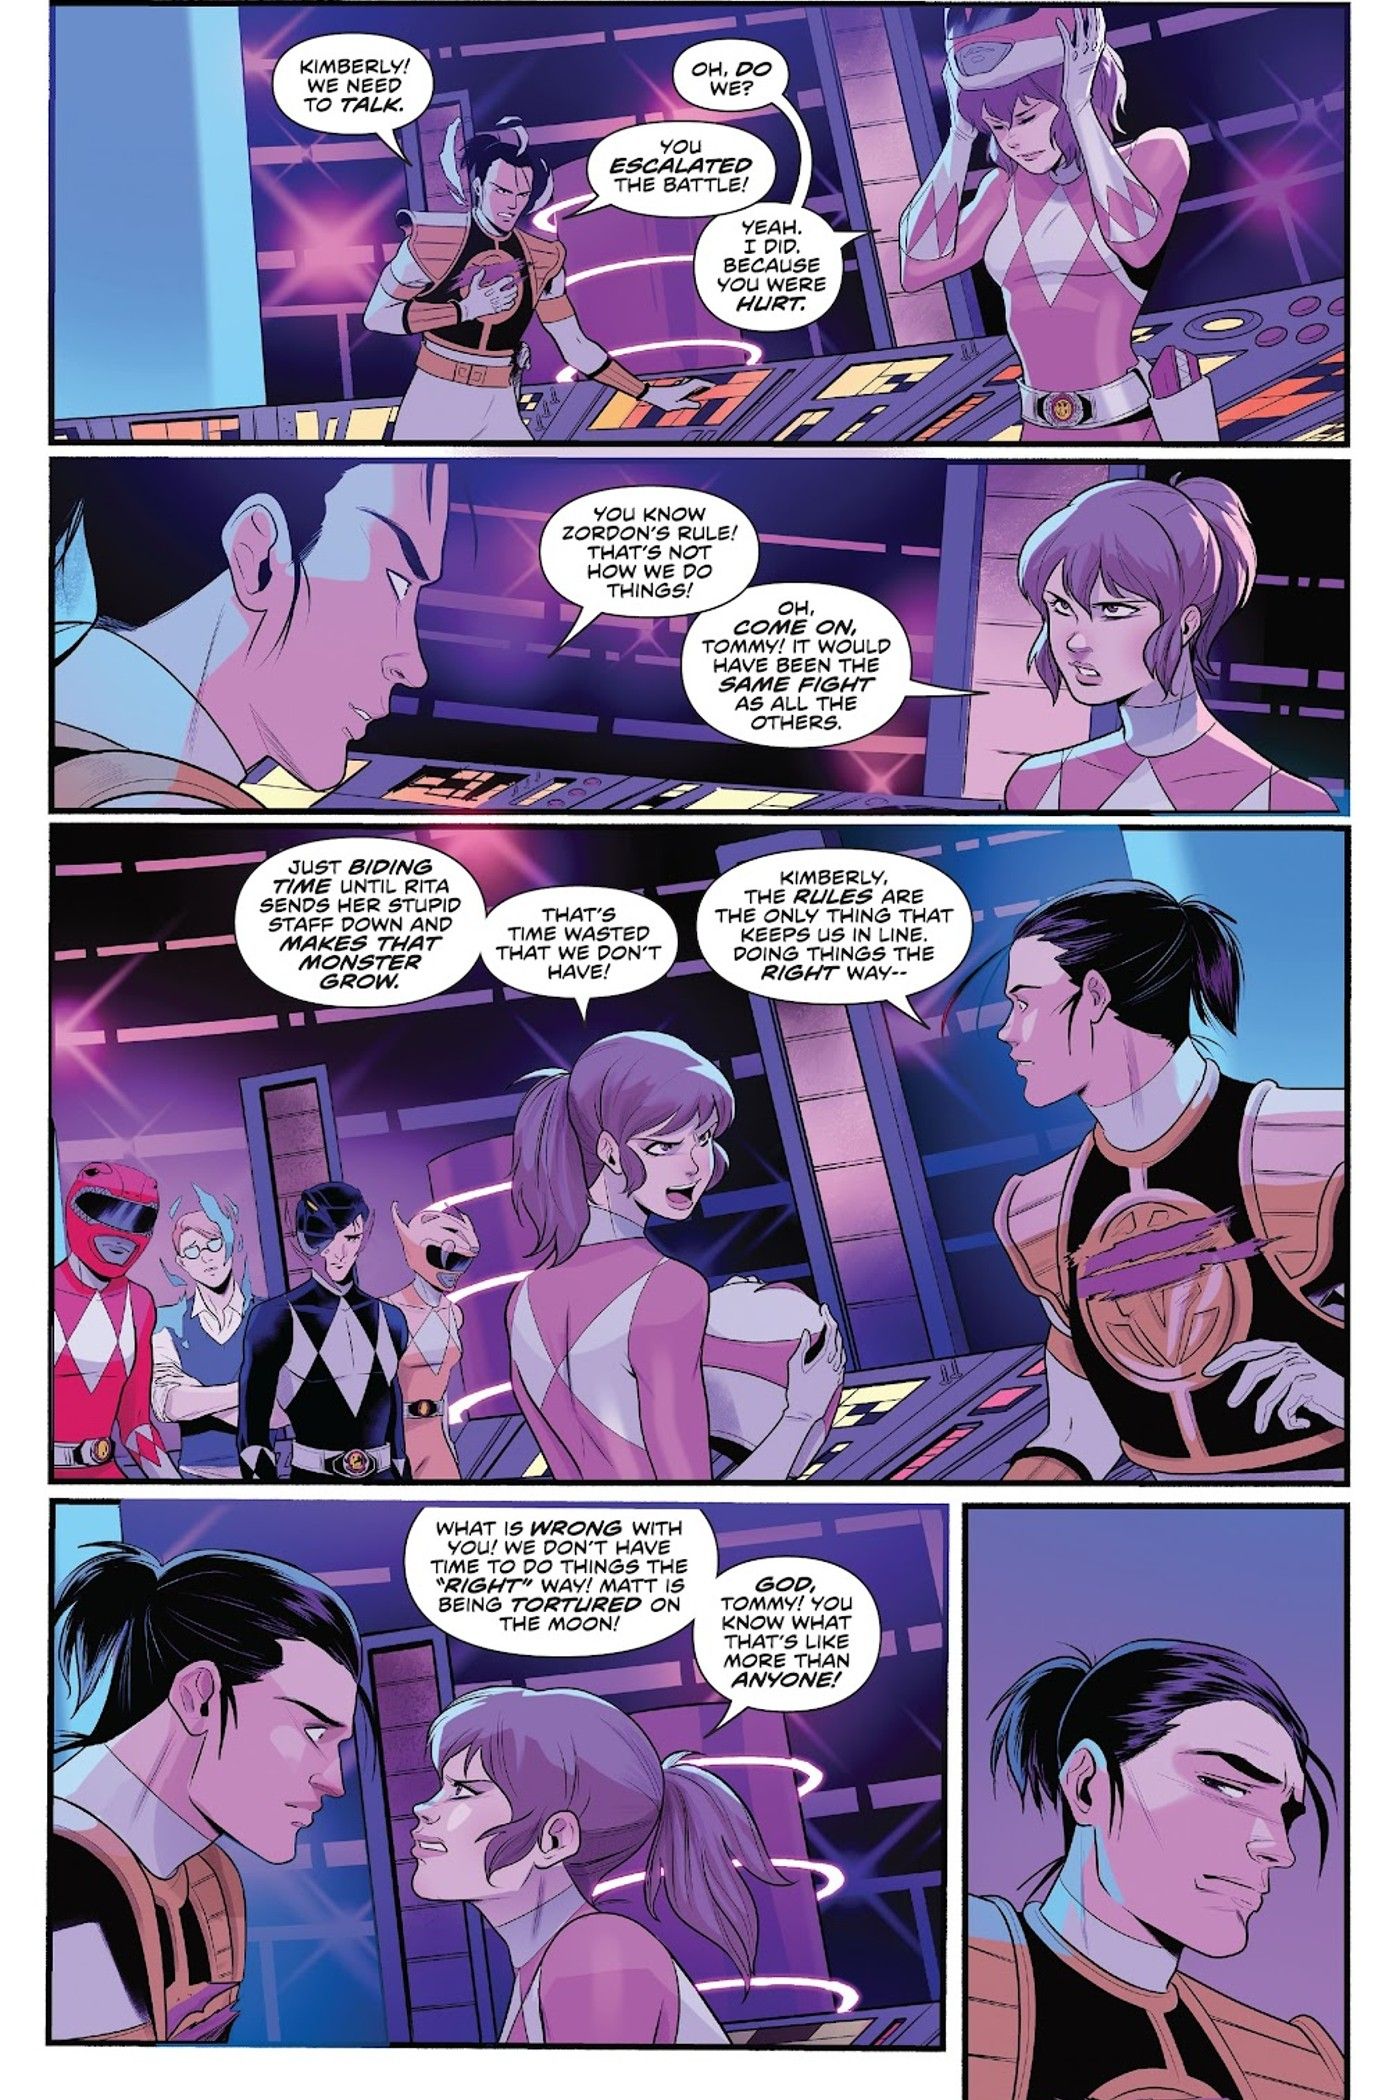 Tommy and Kimberly argue in Mighty Morphin Power Rangers #103